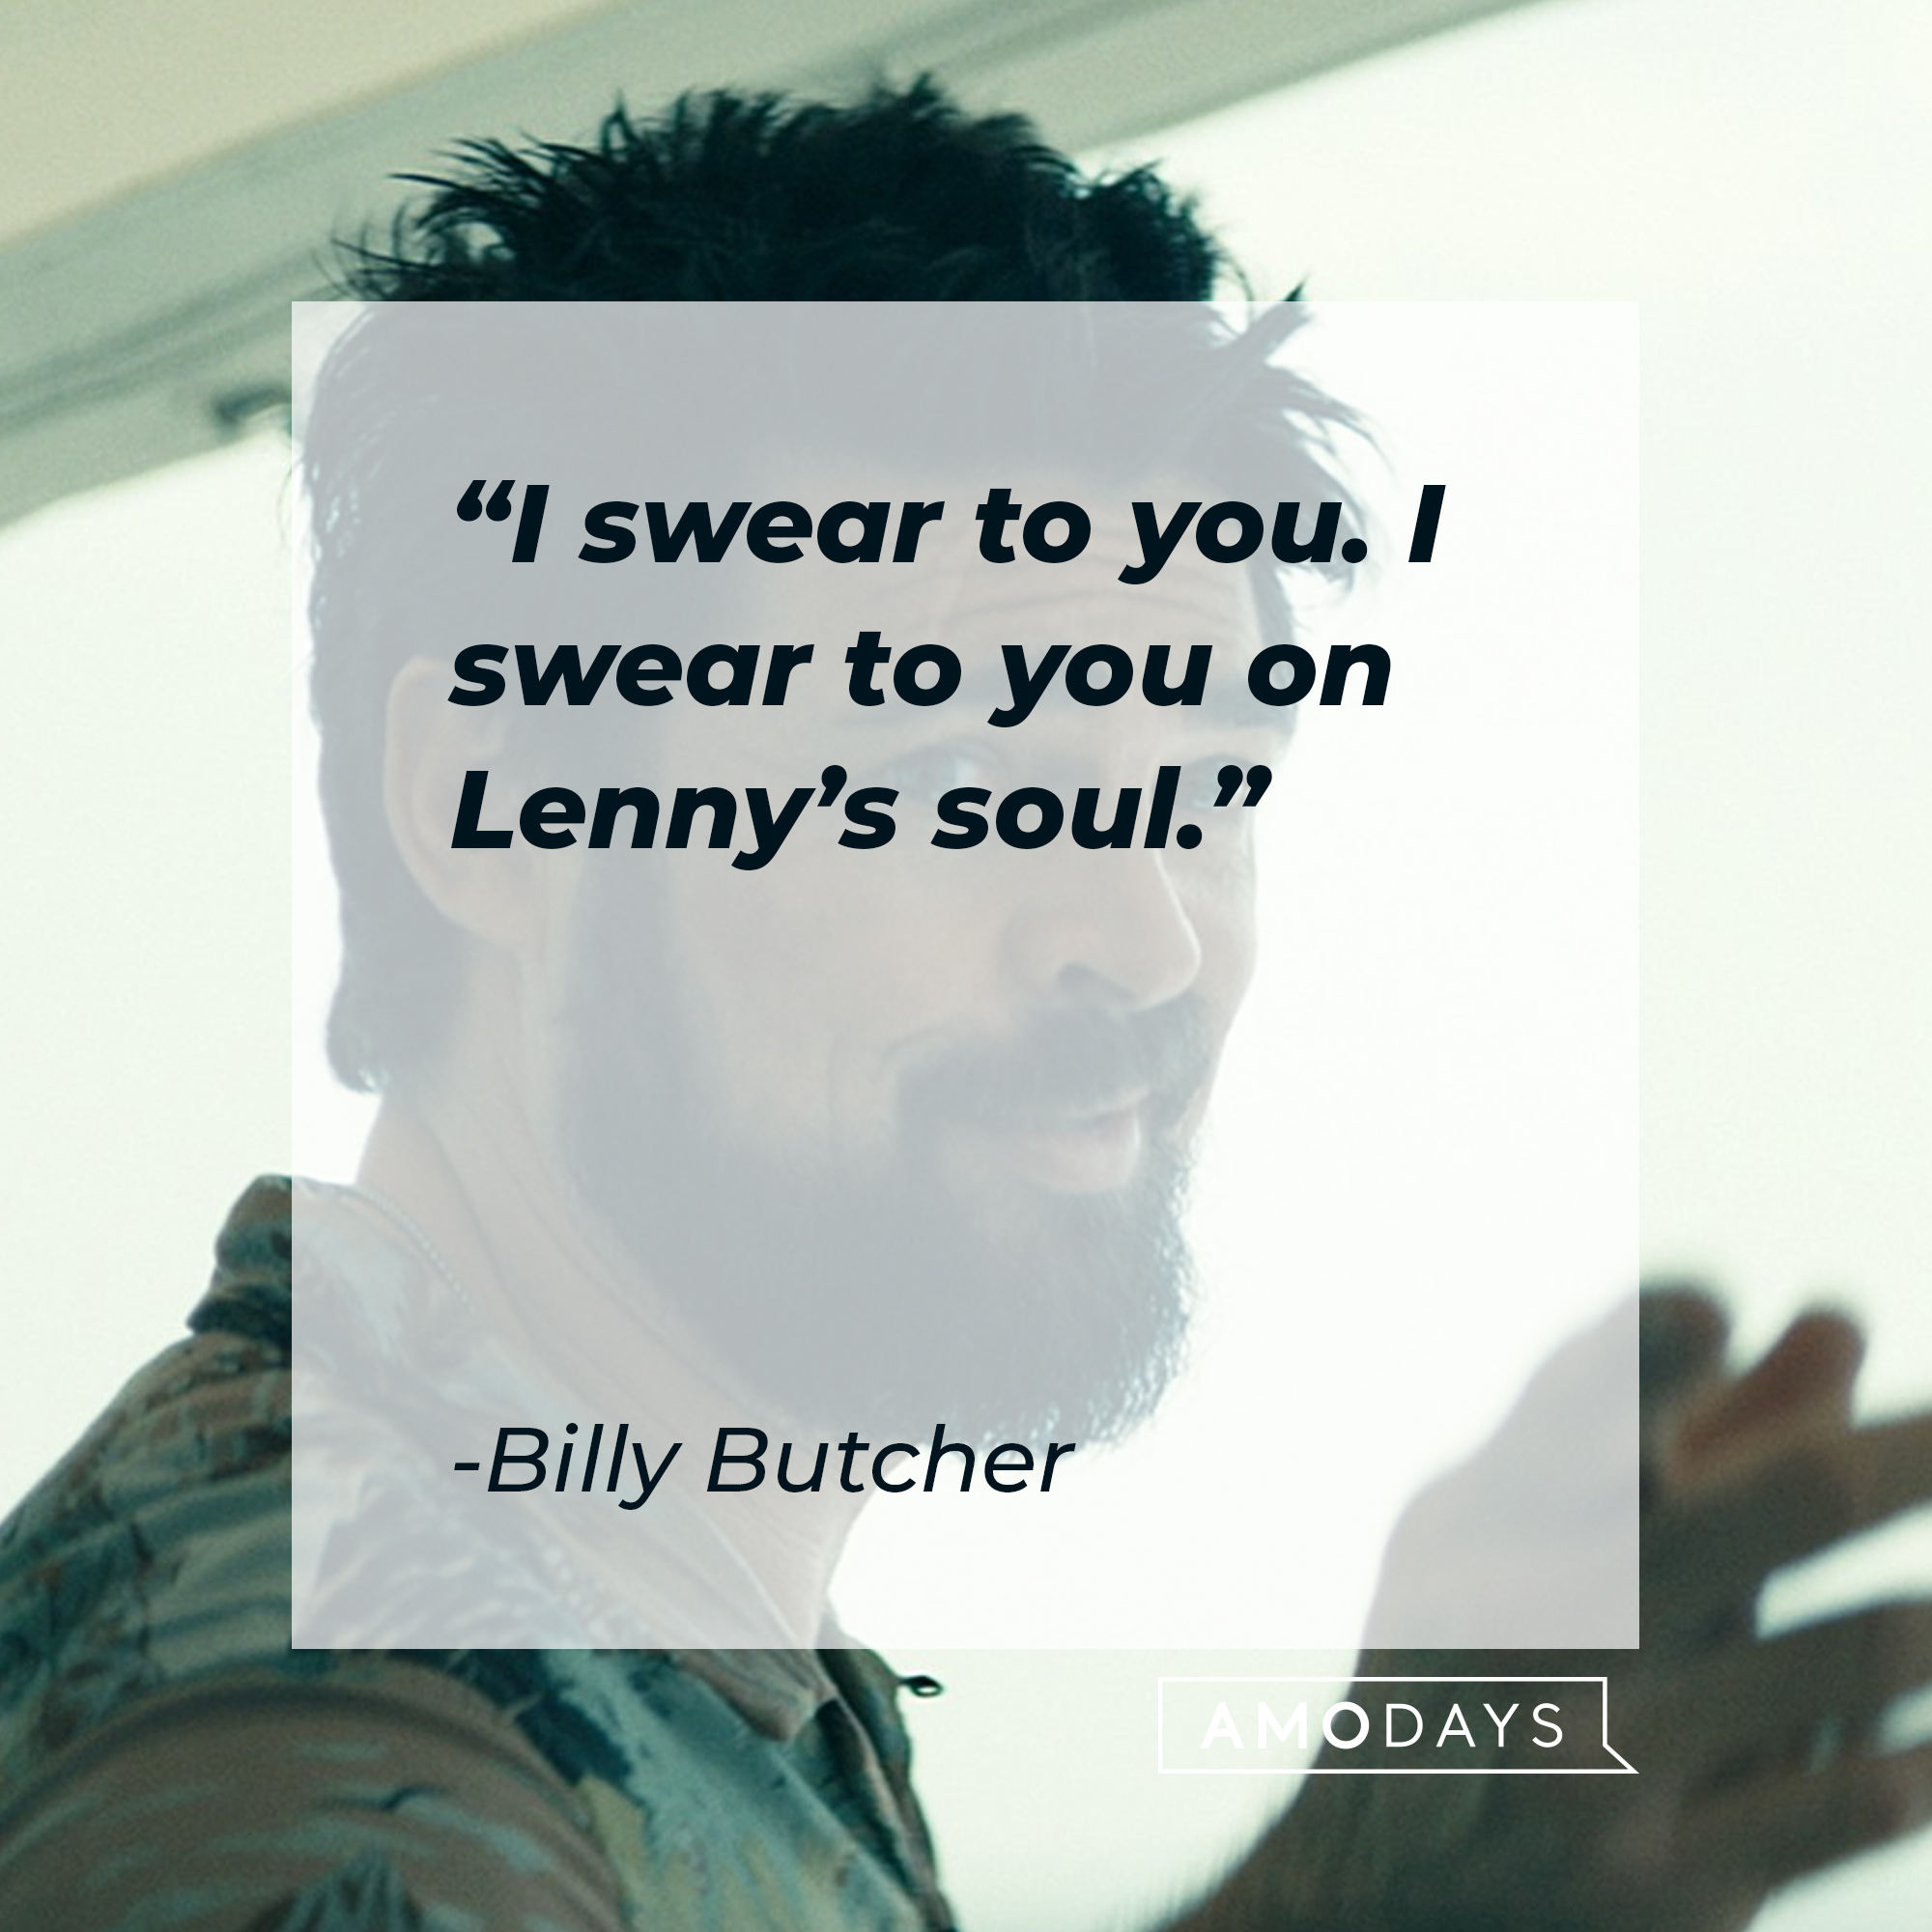 Billy Butcher's quote: "I swear to you, I swear to you on Lenny's soul." | Source: Facebook.com/TheBoysTV